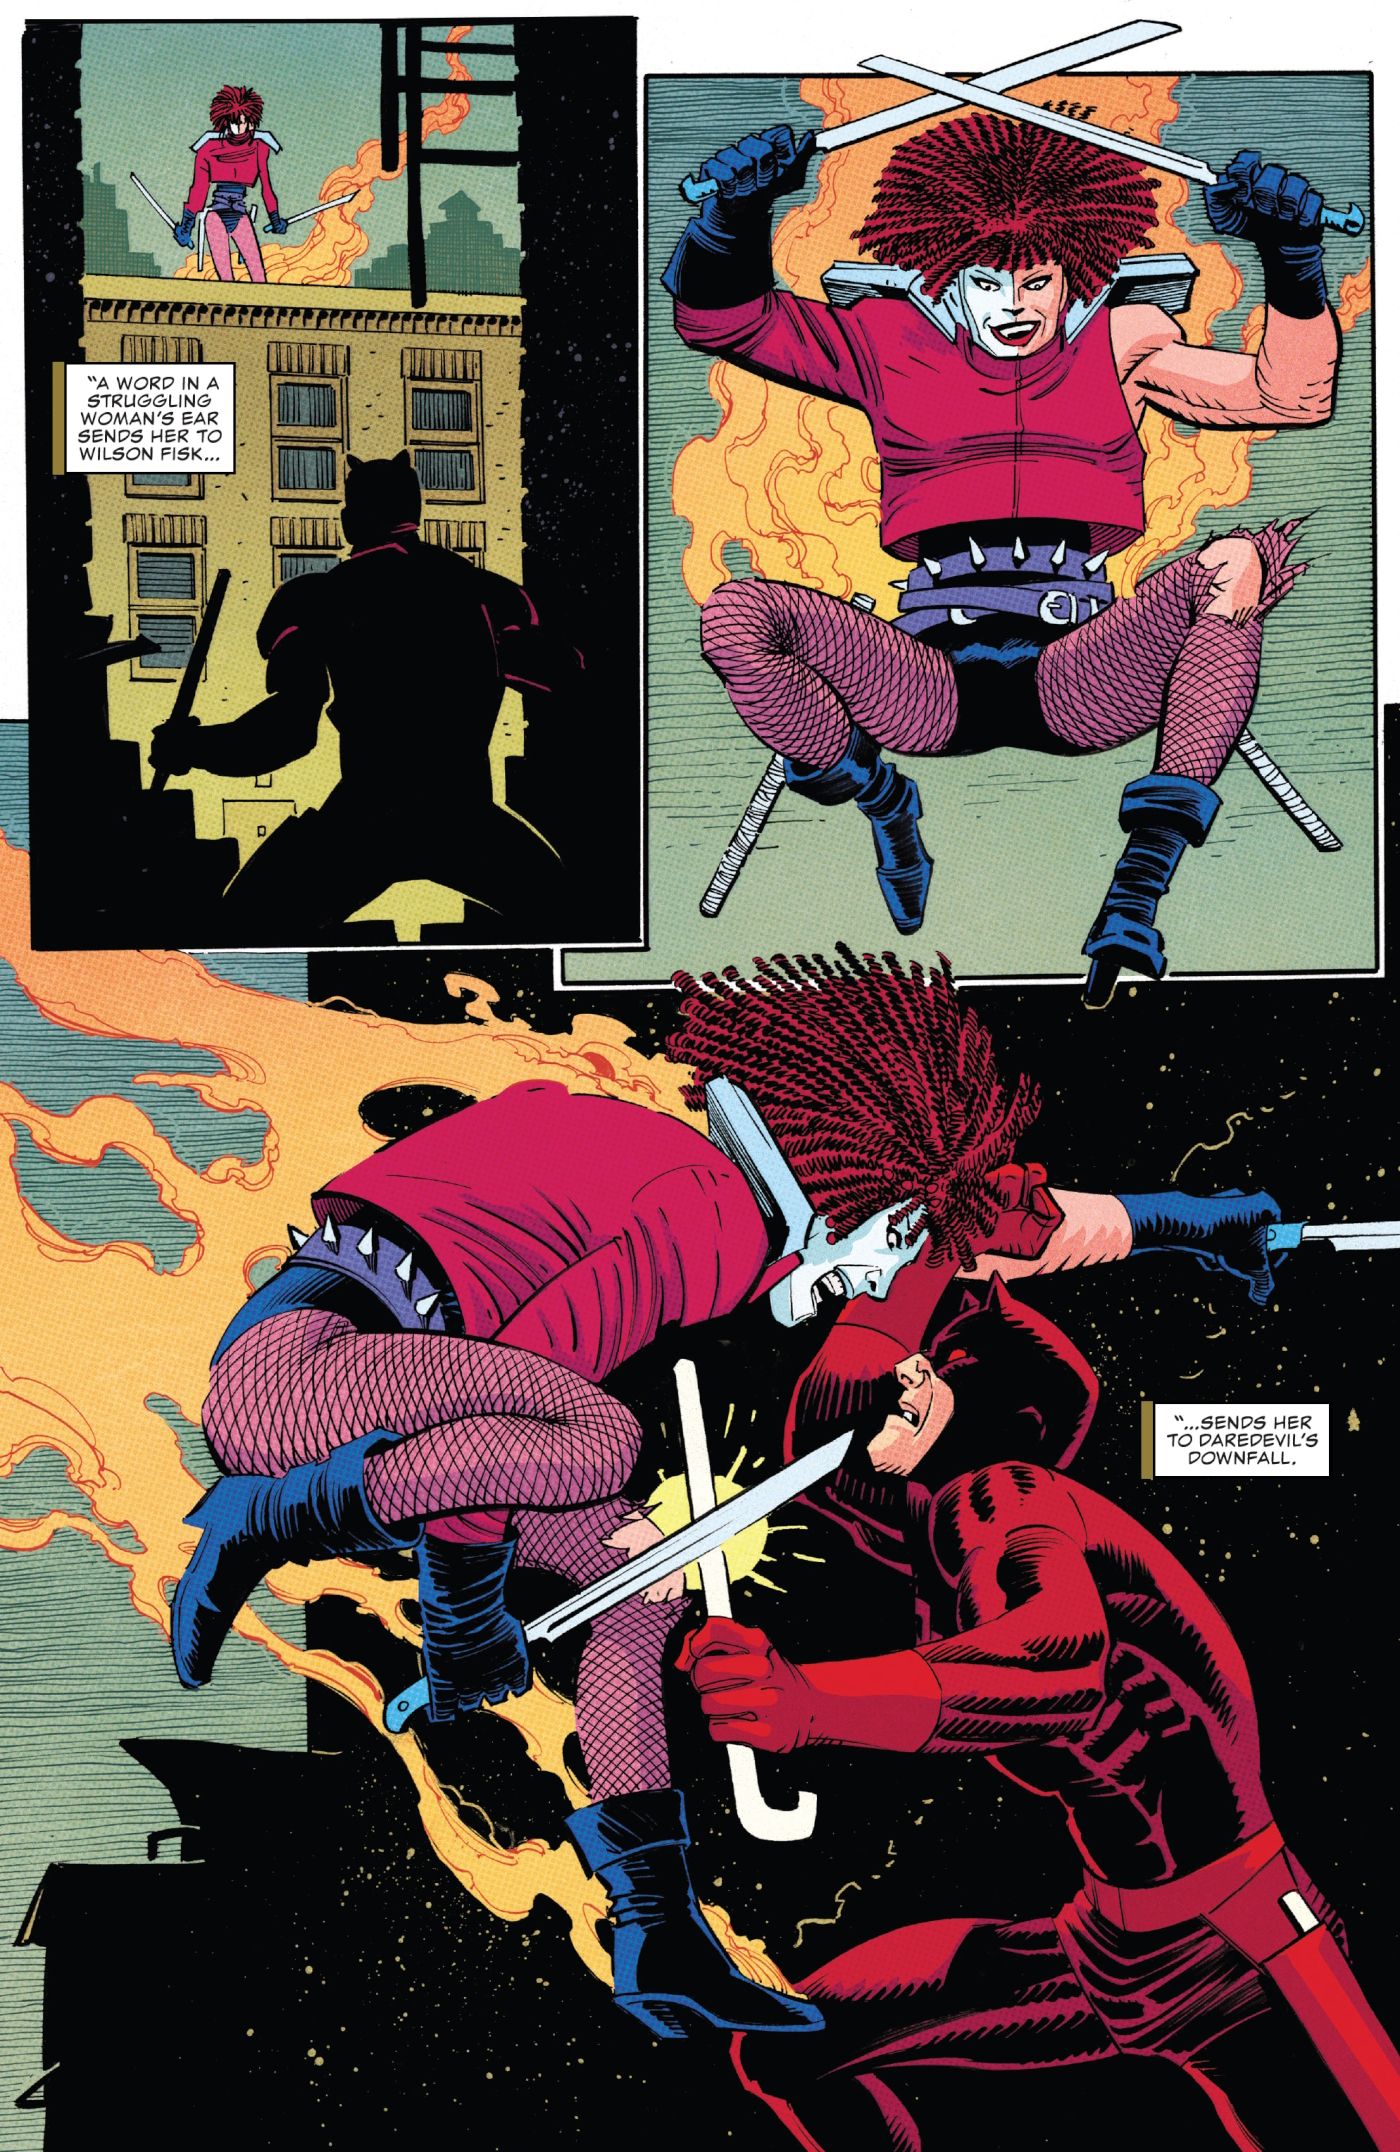 Goldy Put Typhoid Mary Into Contact With Wilson Fisk